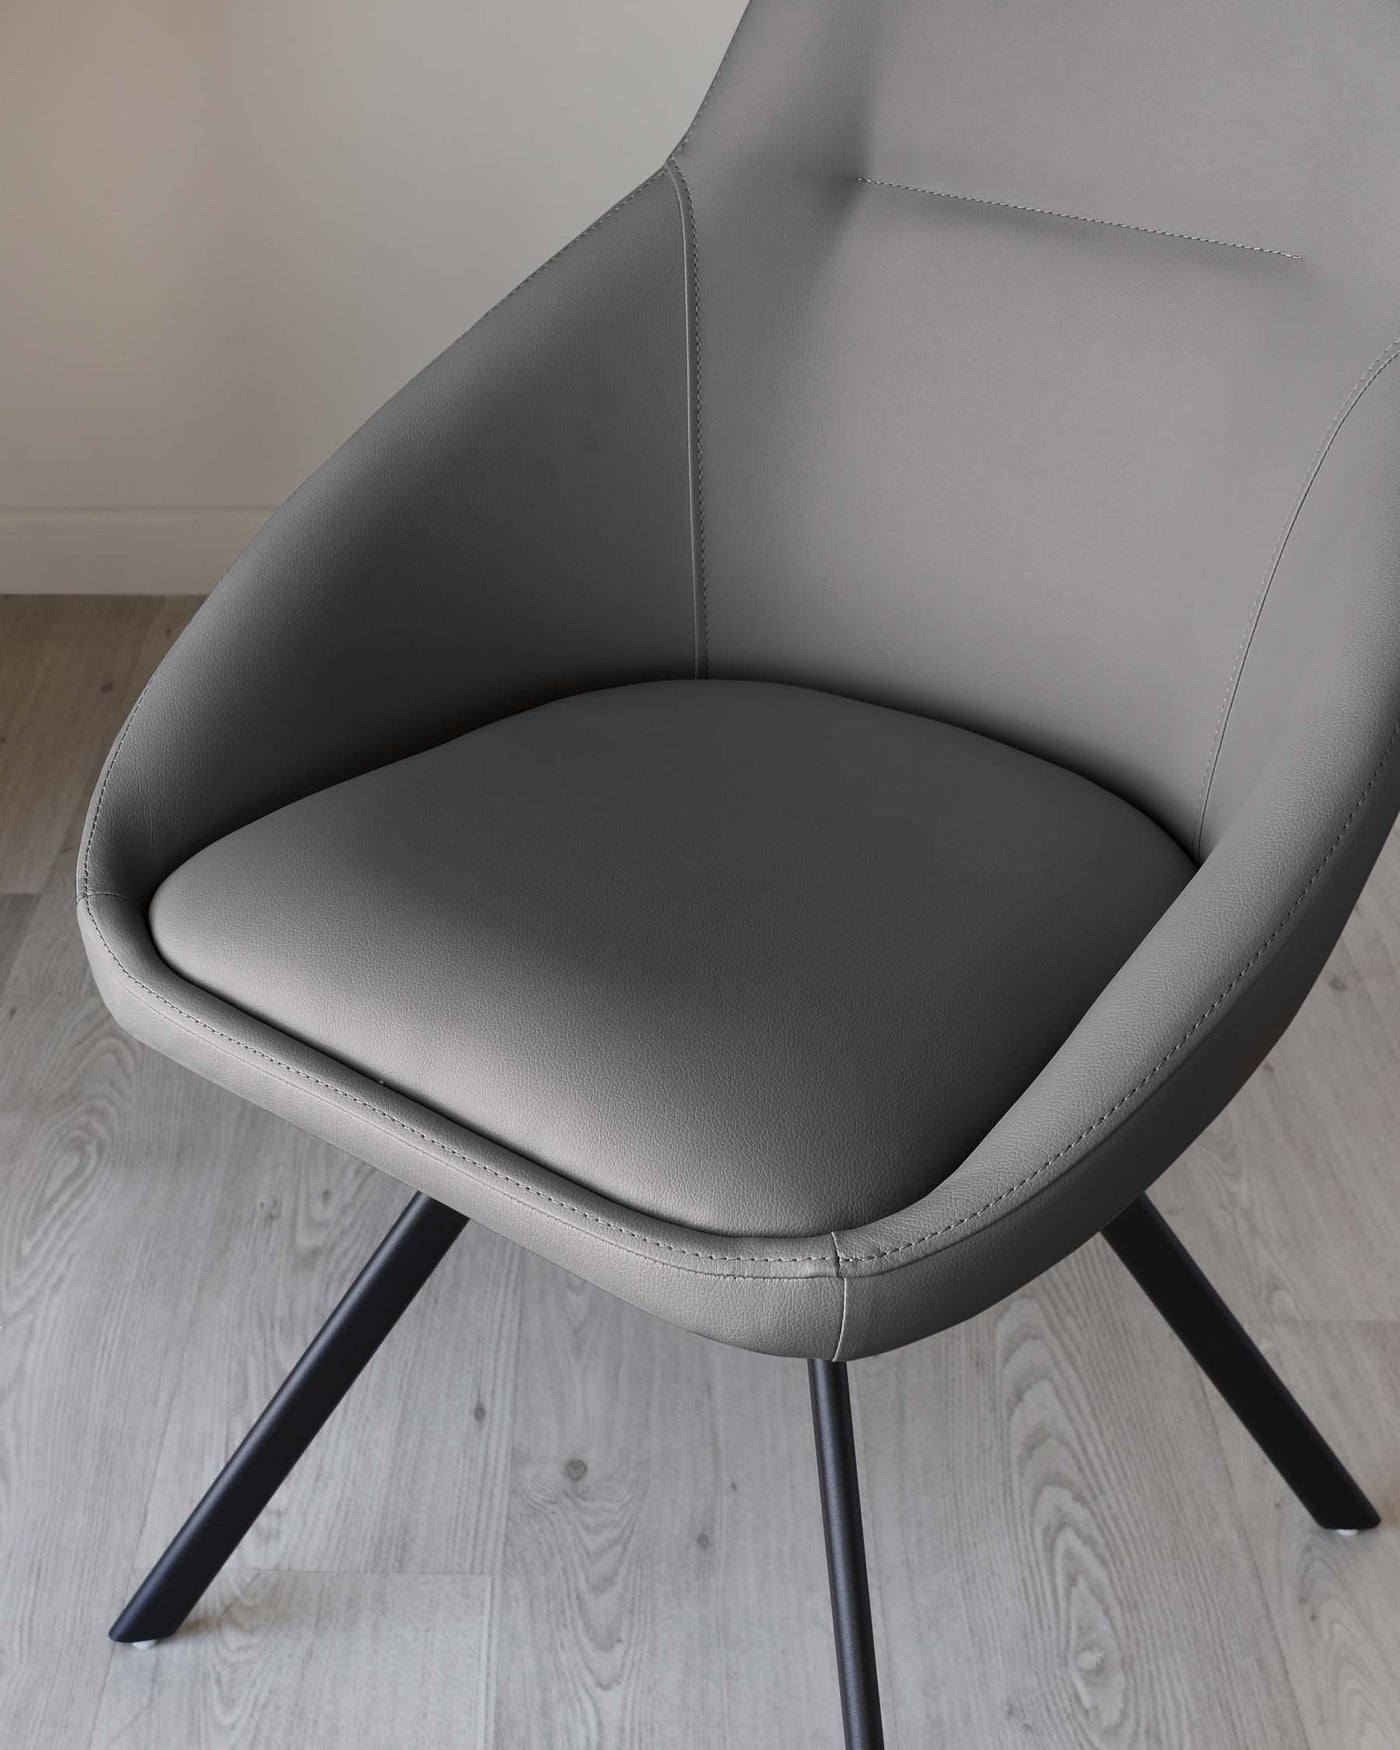 Modern grey upholstered accent chair with a curved backrest and a cushioned seat on black metal legs against a light wooden floor background.